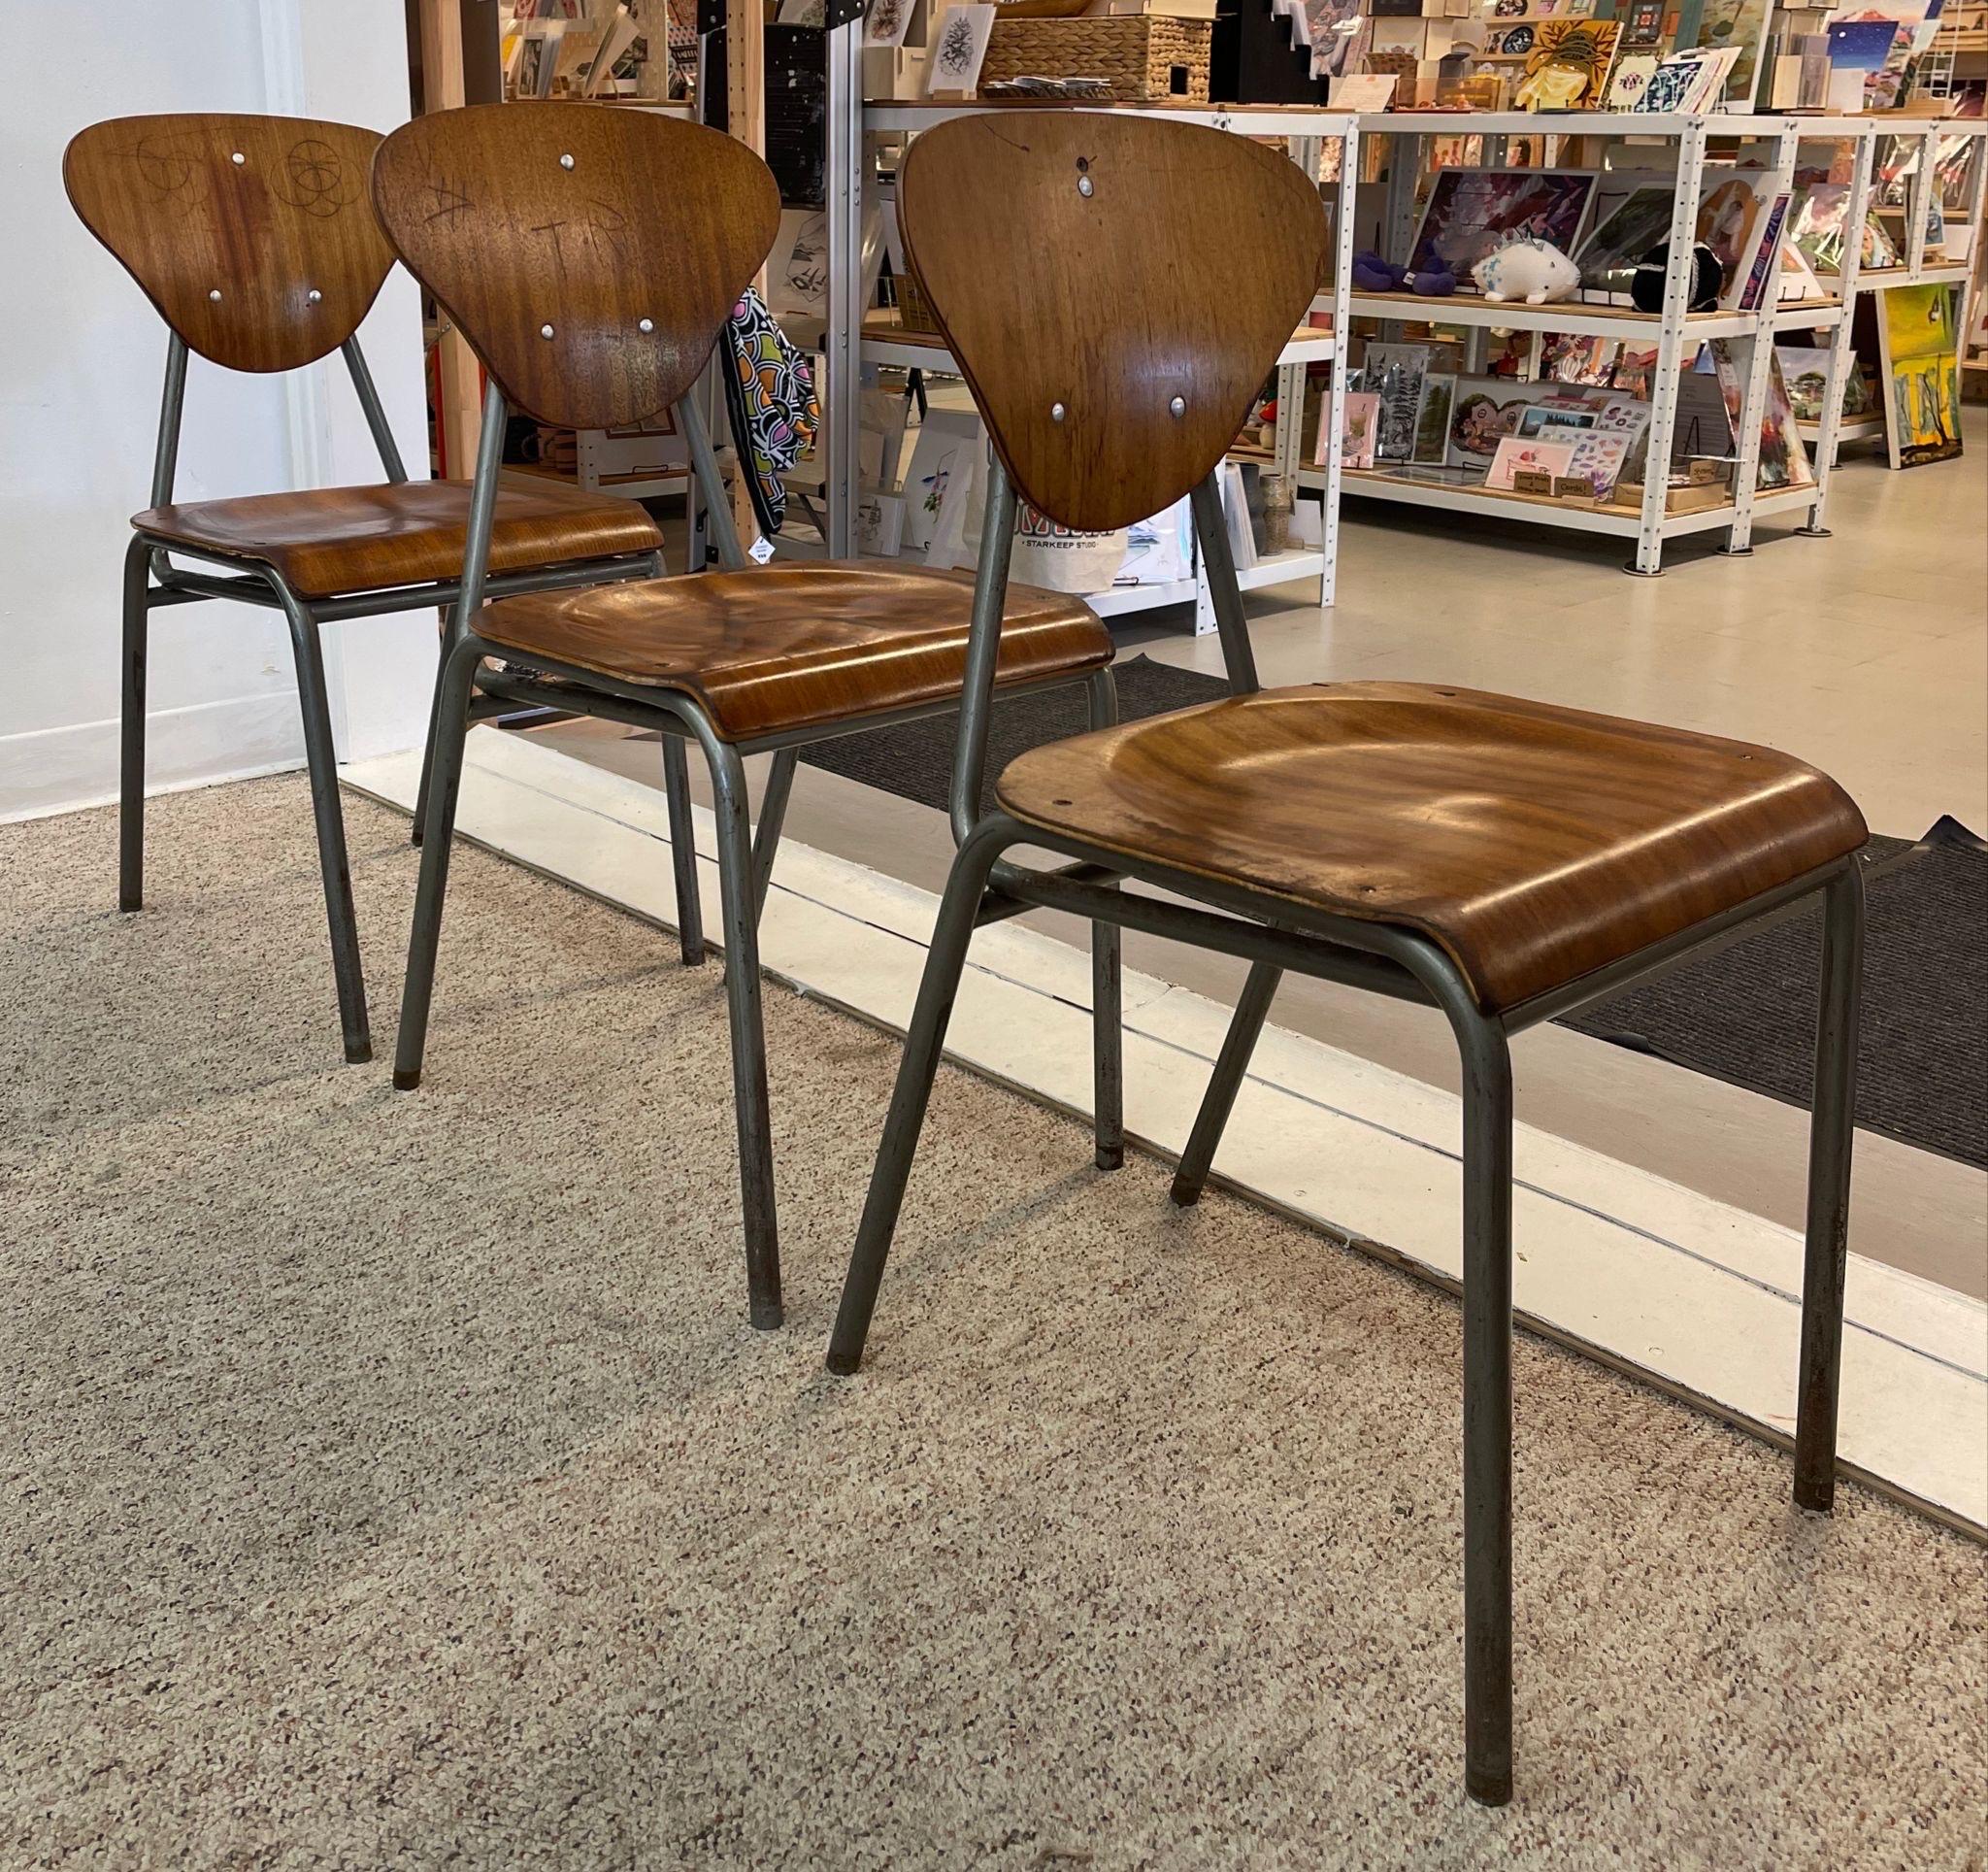 Vintage Danish Modern Chairs With Metal Frame. Set of 4. In Good Condition For Sale In Seattle, WA